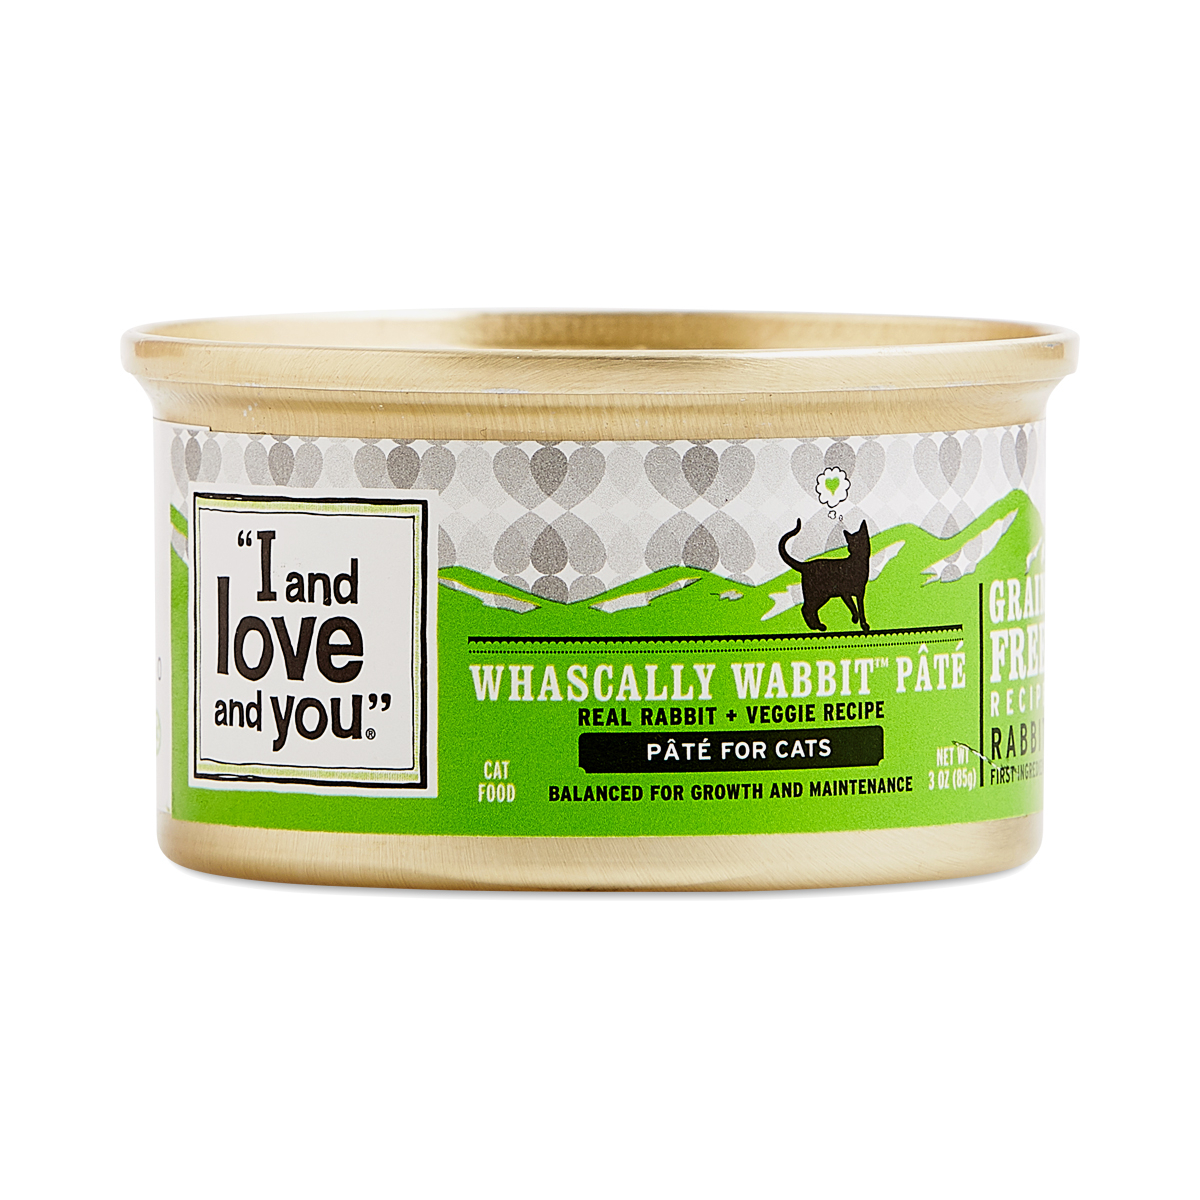 4-Pack I and love and you Canned Cat Food, Whascally Wabbit Recipe 3 oz can